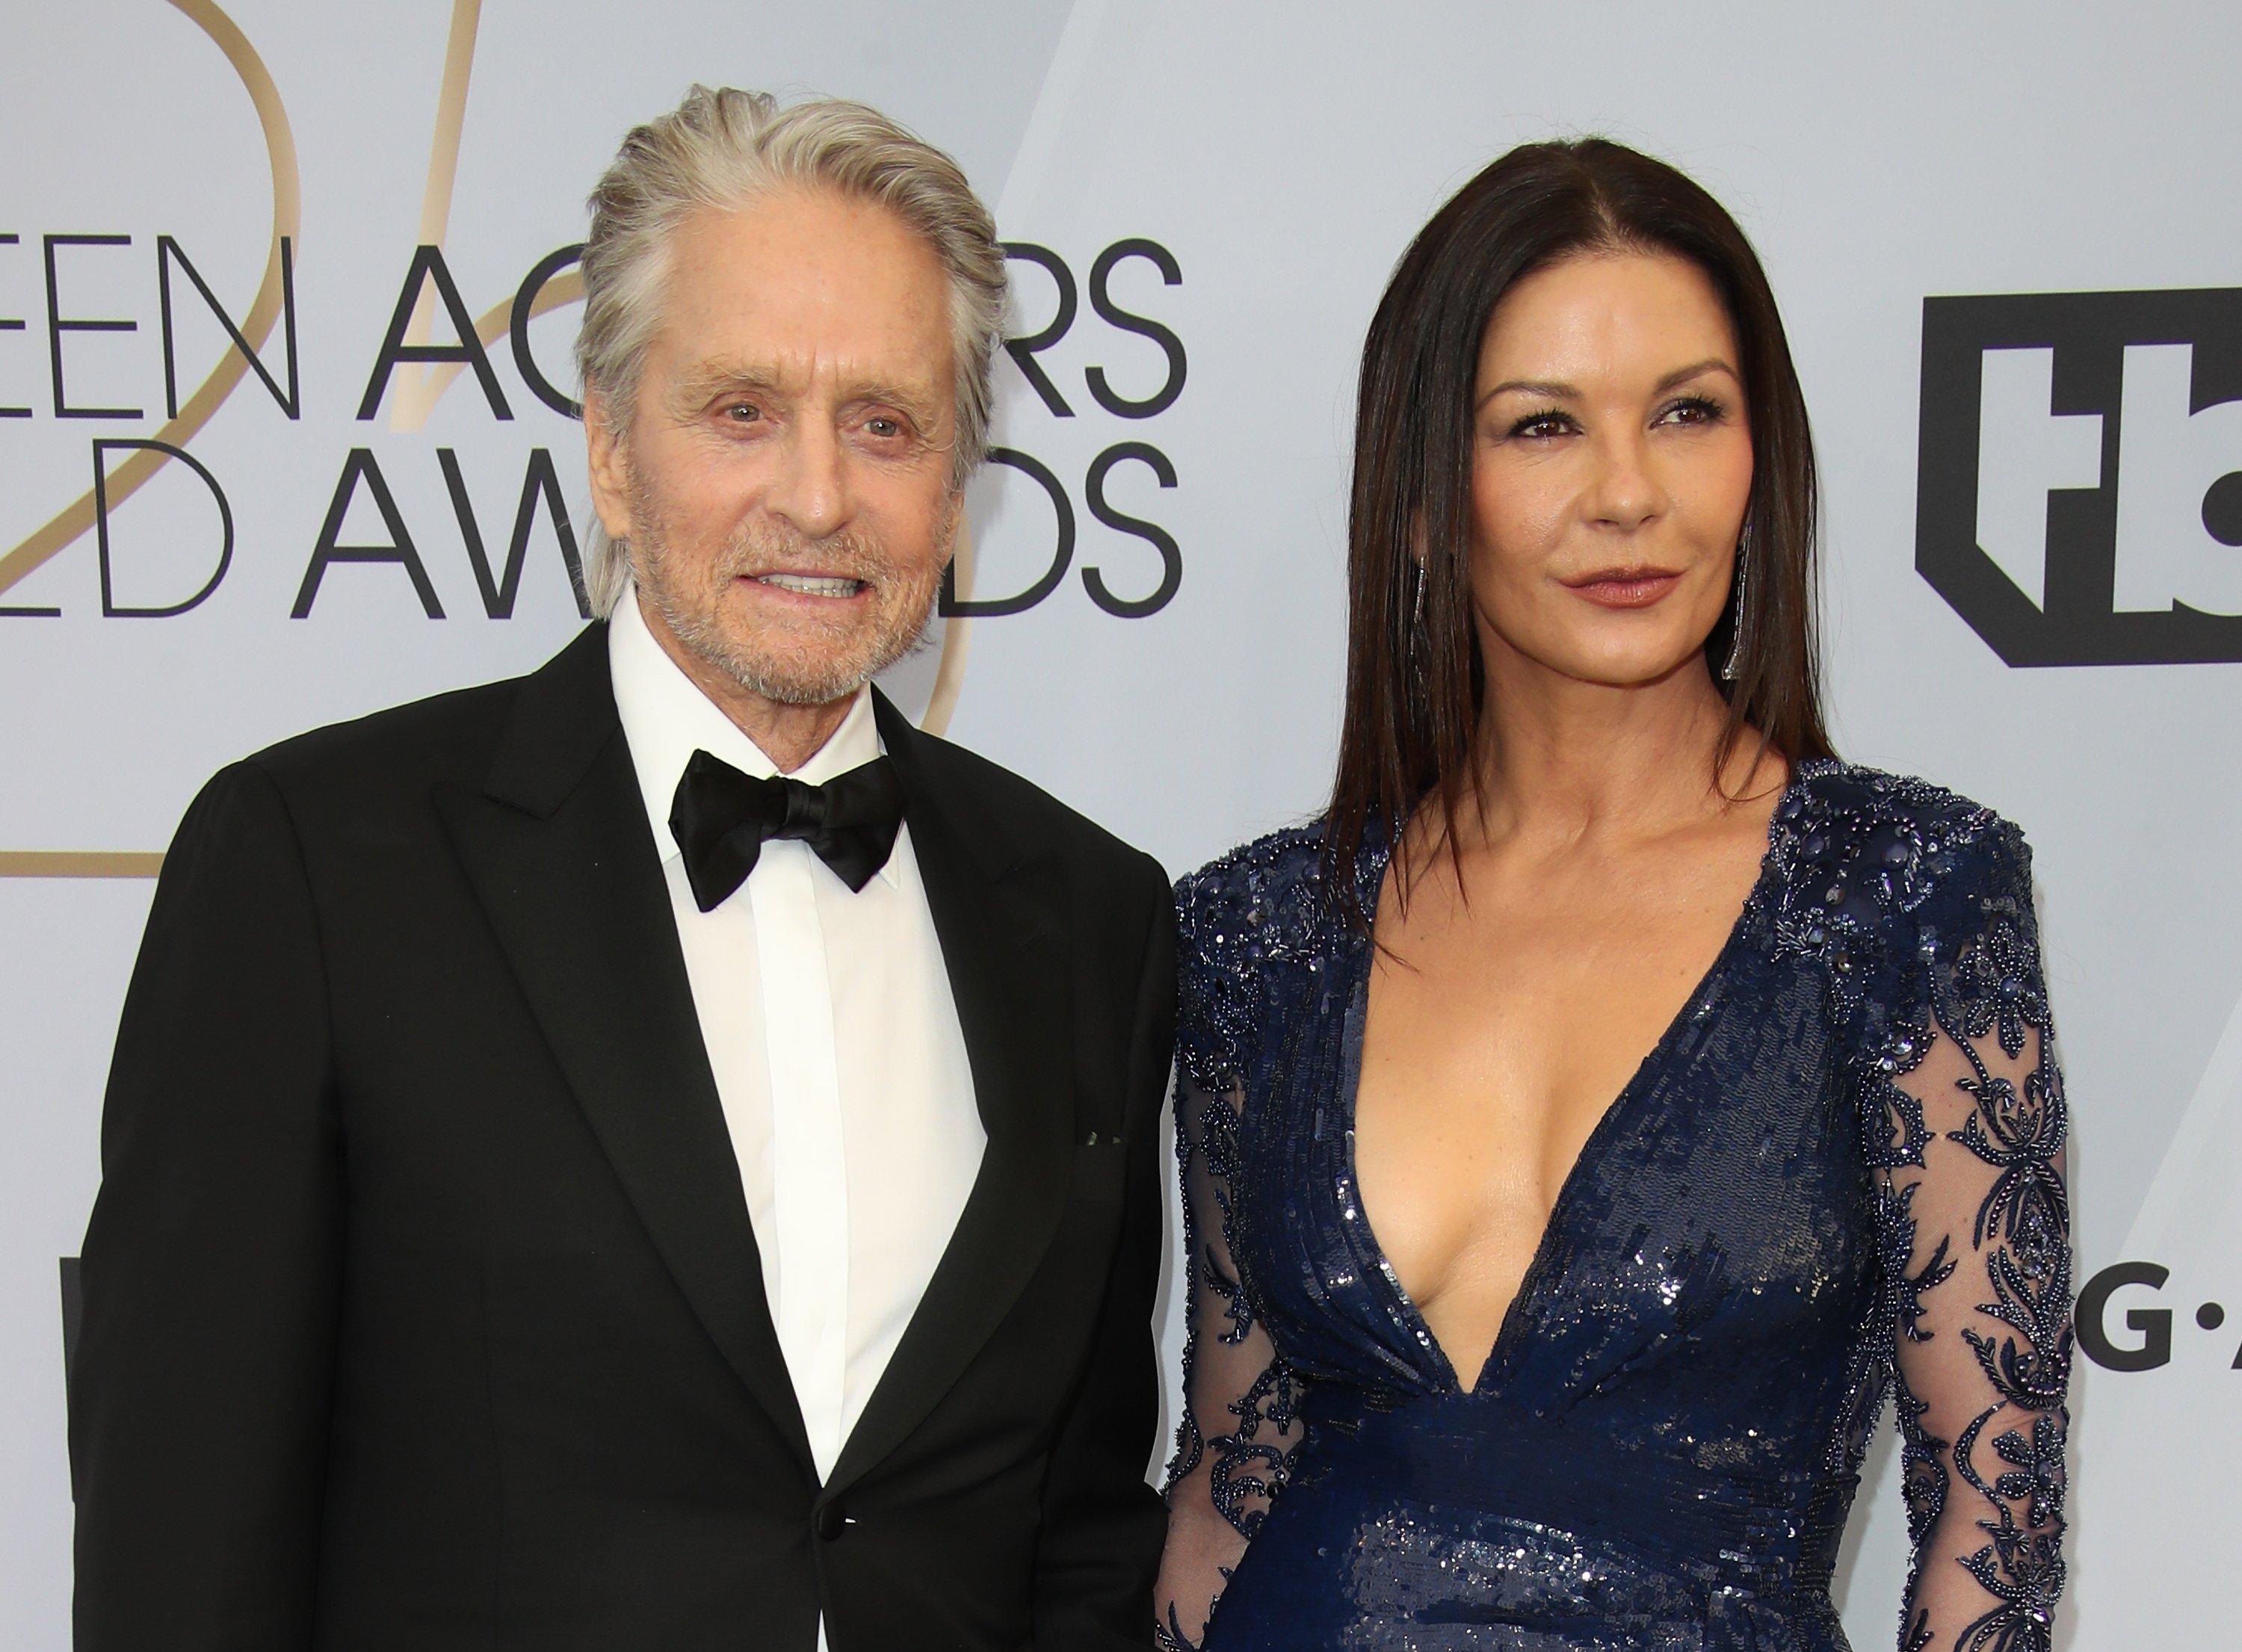 Michael Douglas and Catherine Zeta-Jones attend the 25th Annual Screen Actors Guild Awards at The Shrine Auditorium on January 27, 2019, in Los Angeles, California. | Source: Getty Images